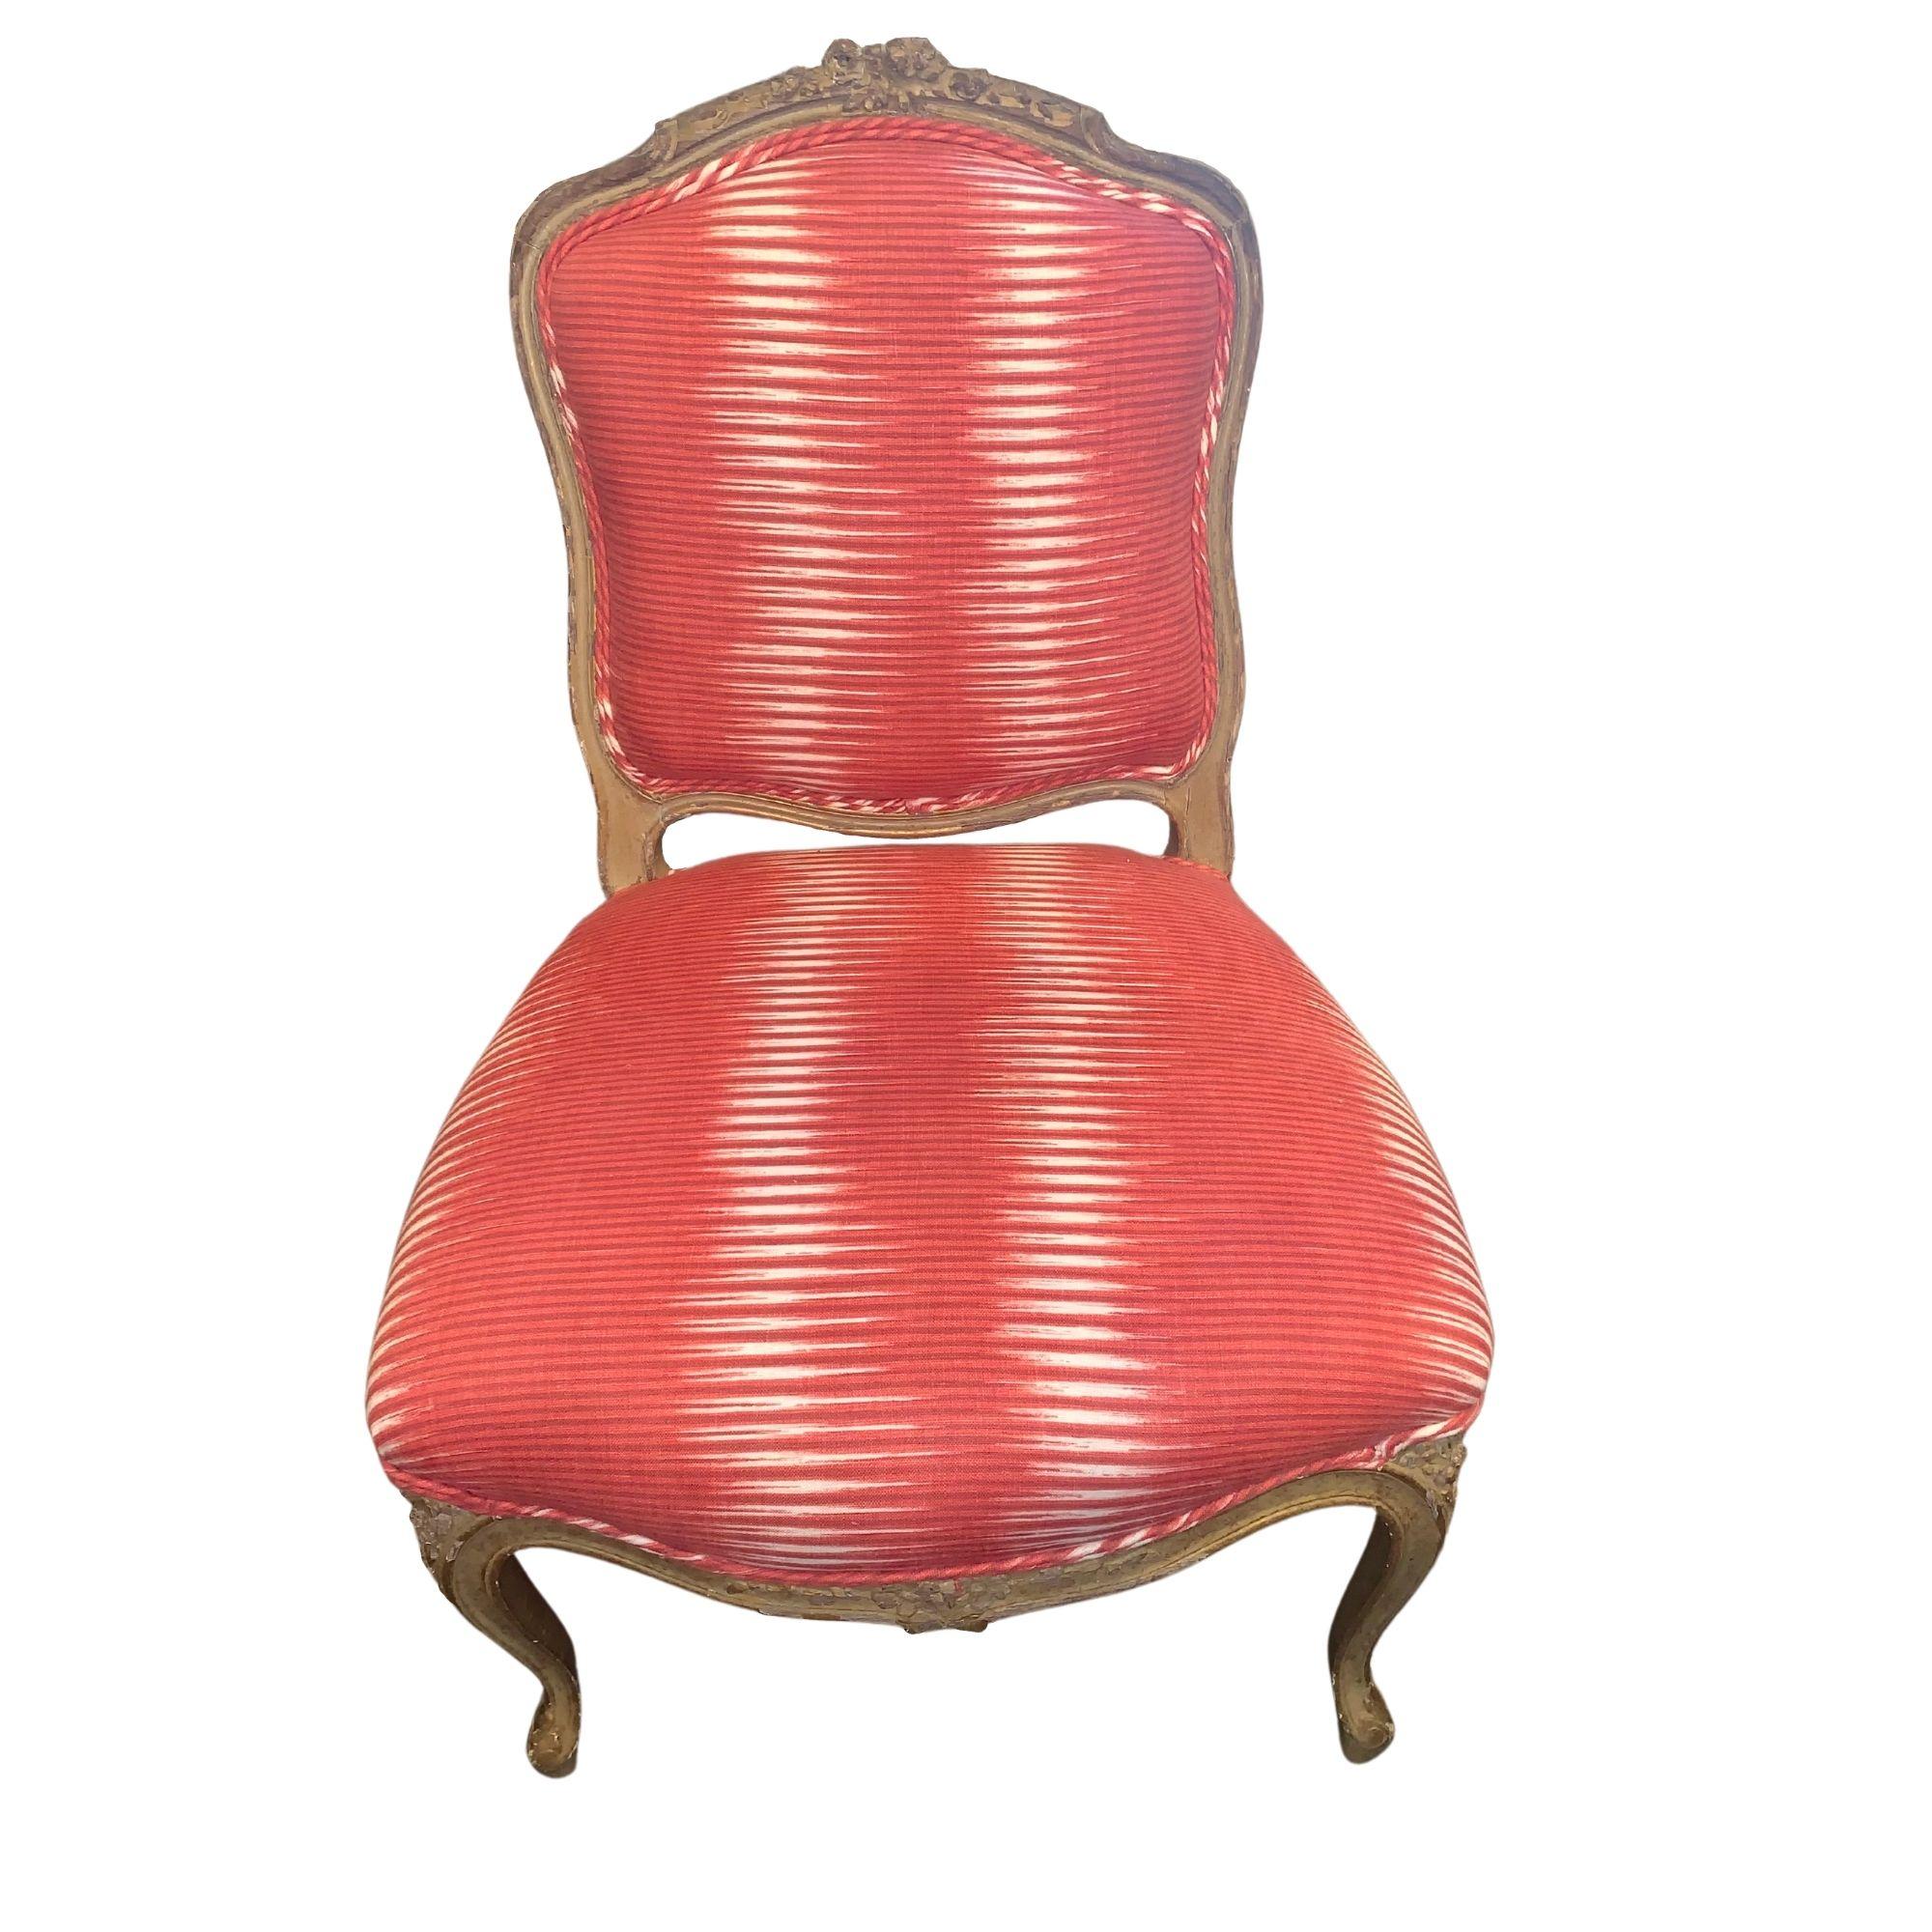 19th century French chair recovered in Michelle Nussbaumer's, Cosmico Ikat in Carmine, fabric from her line with Clarence House.